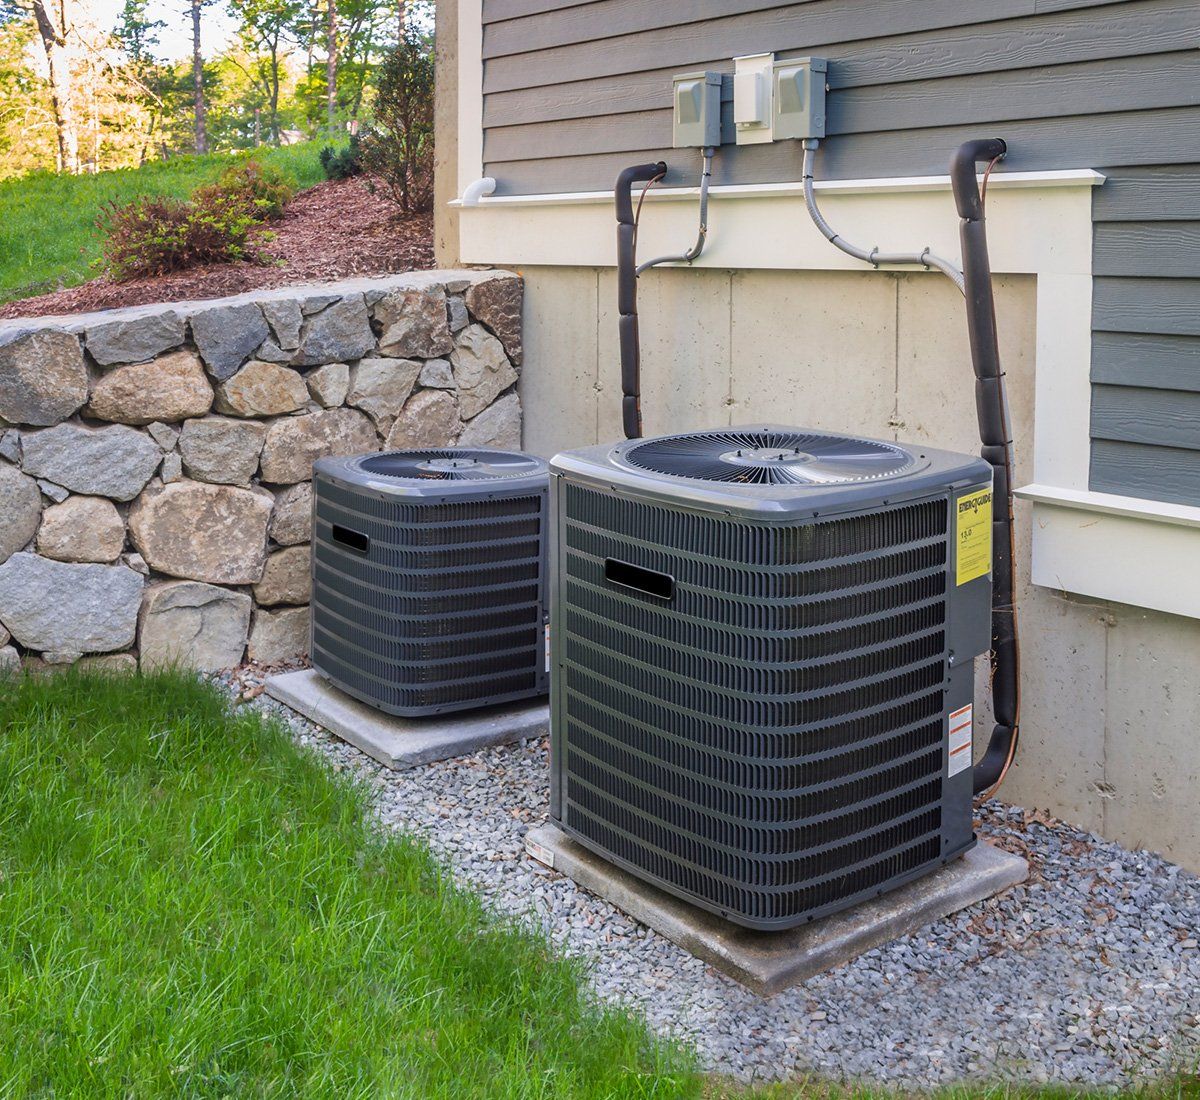 Residential Heating and Air Conditioner Compressor Units — Lincoln, NE — Service Techs